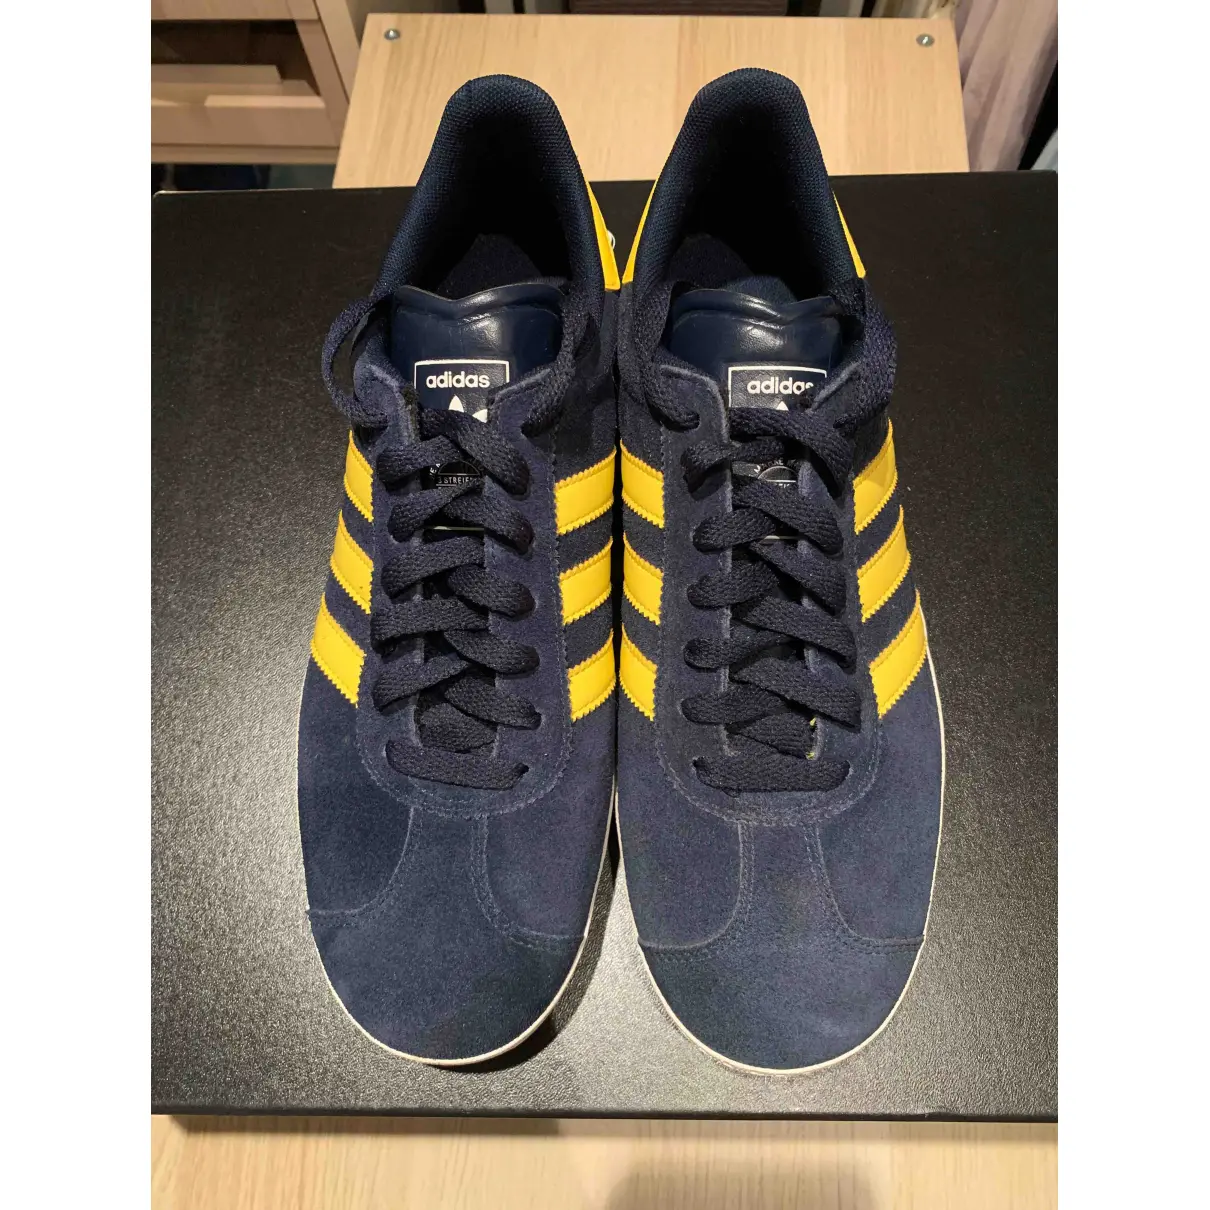 Buy Adidas Gazelle leather trainers online